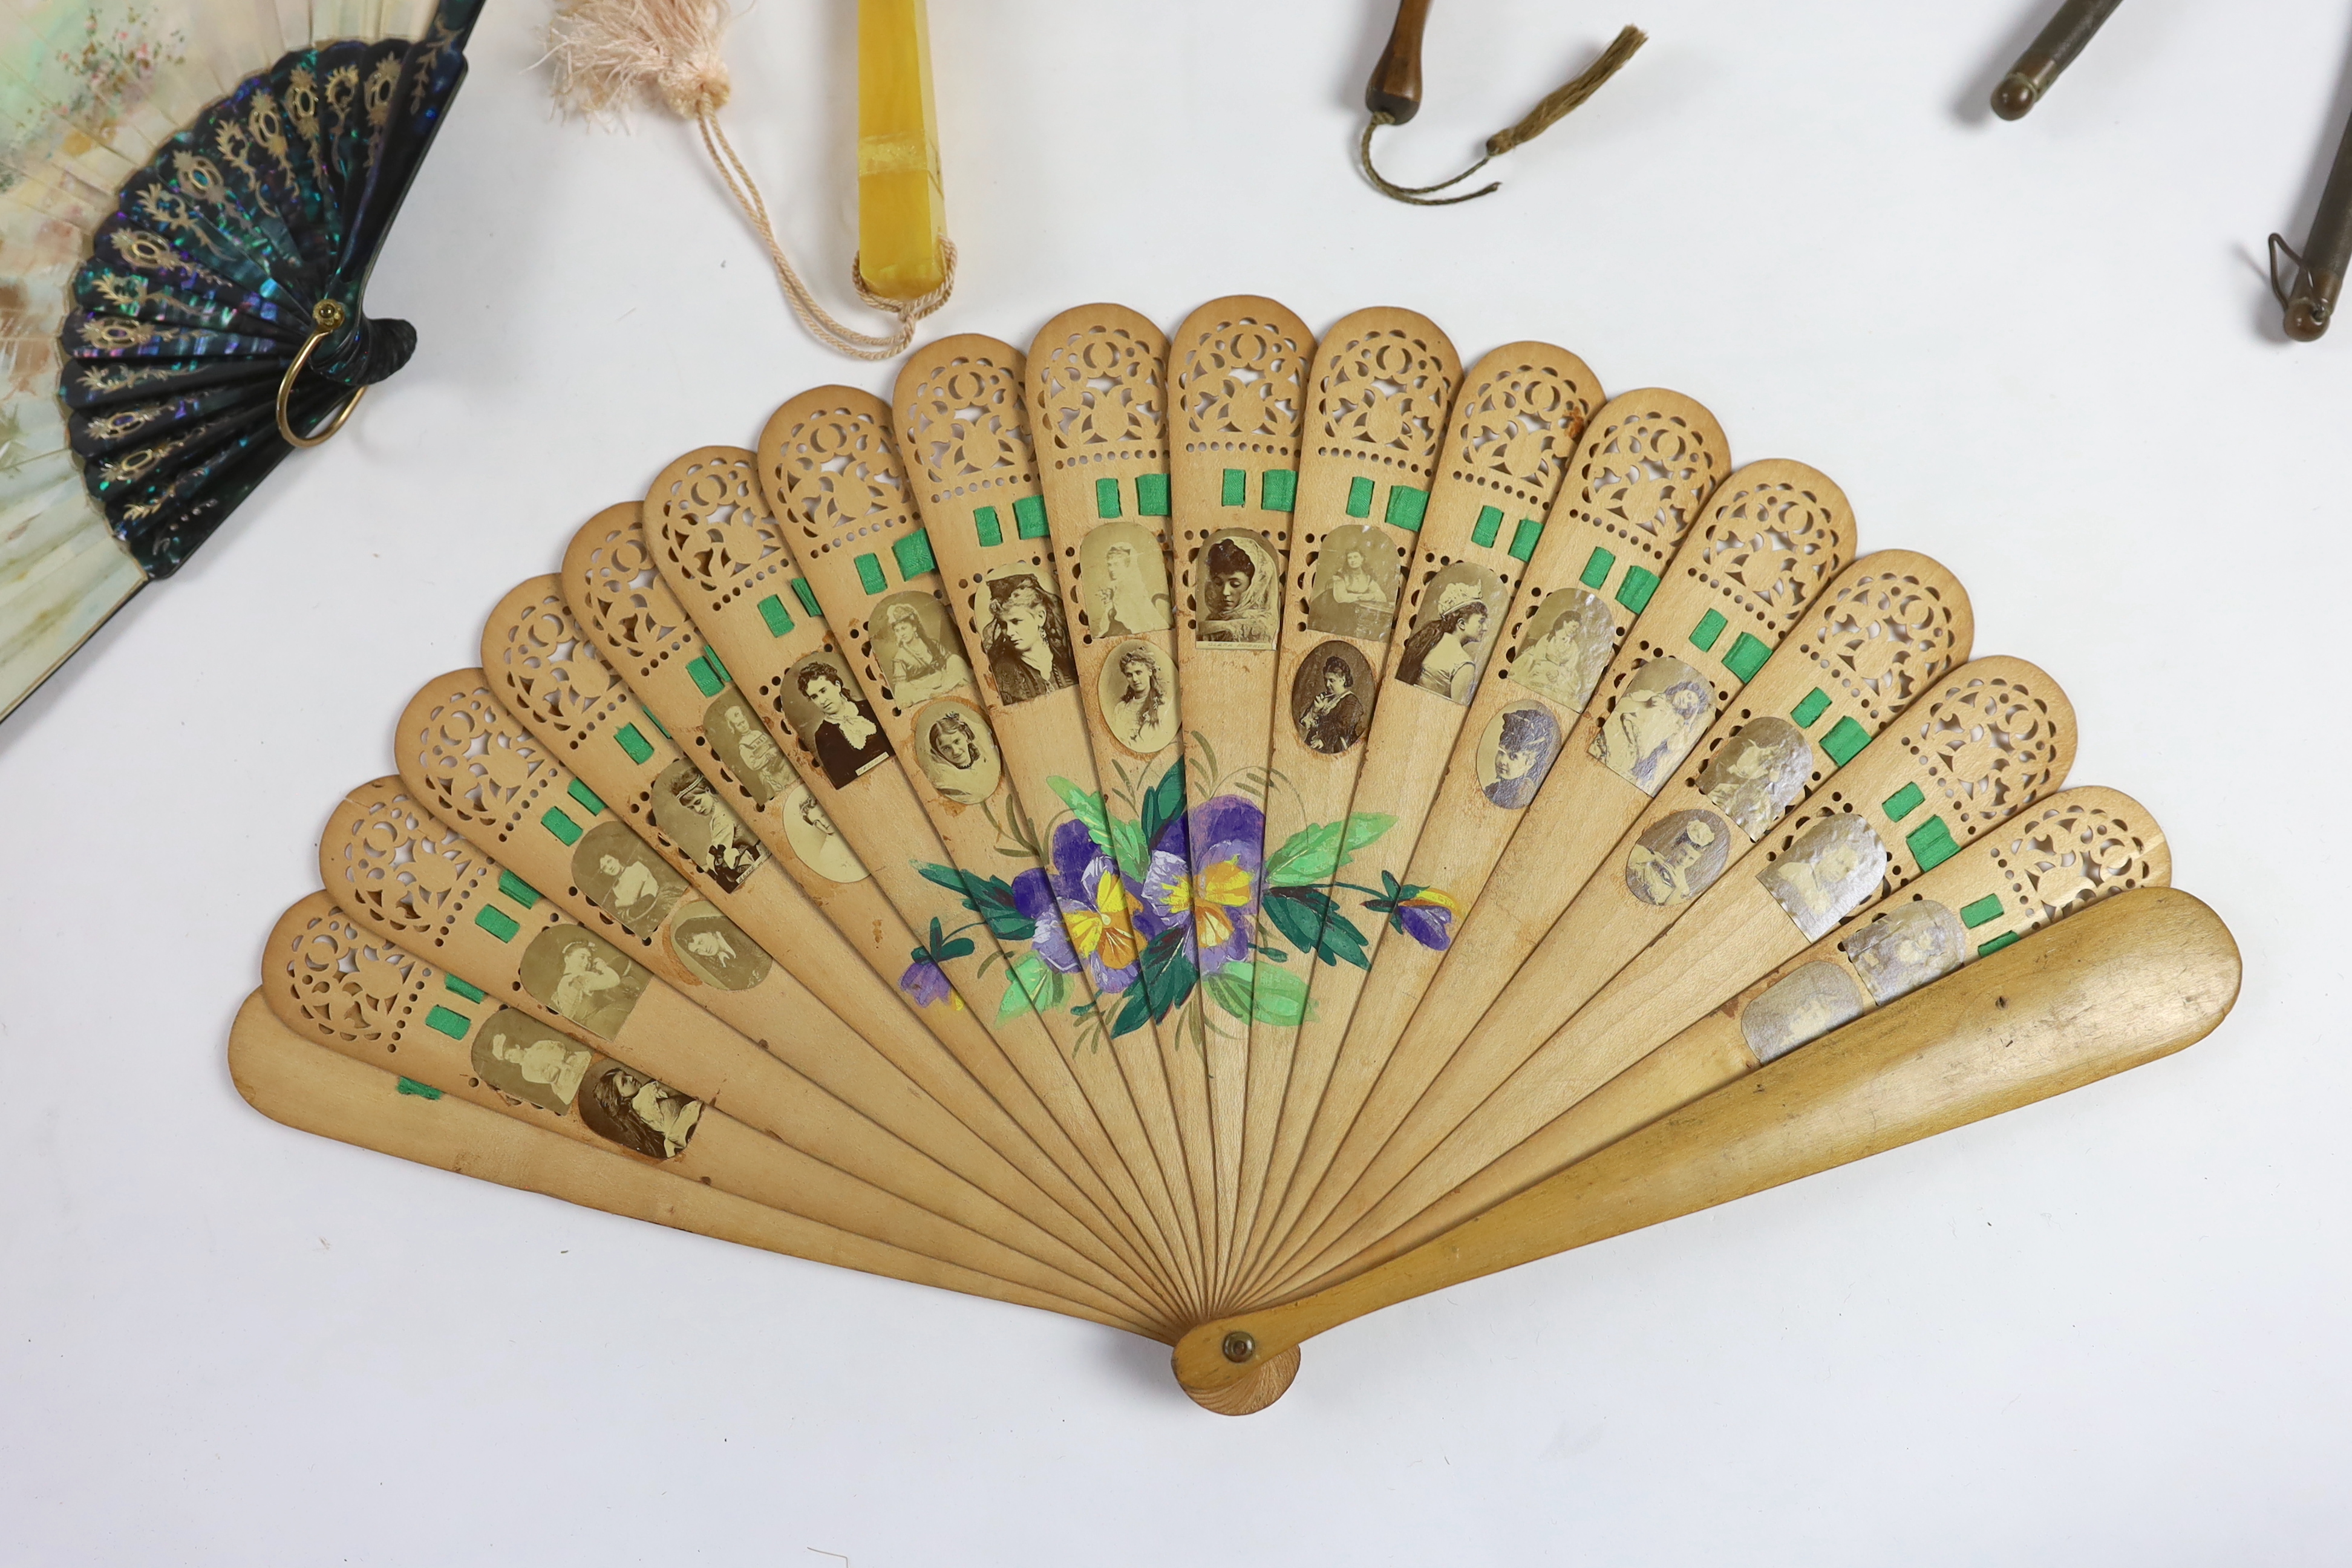 Six Edwardian novelty and unusual fans, some possibly bought during a Grand Tour.